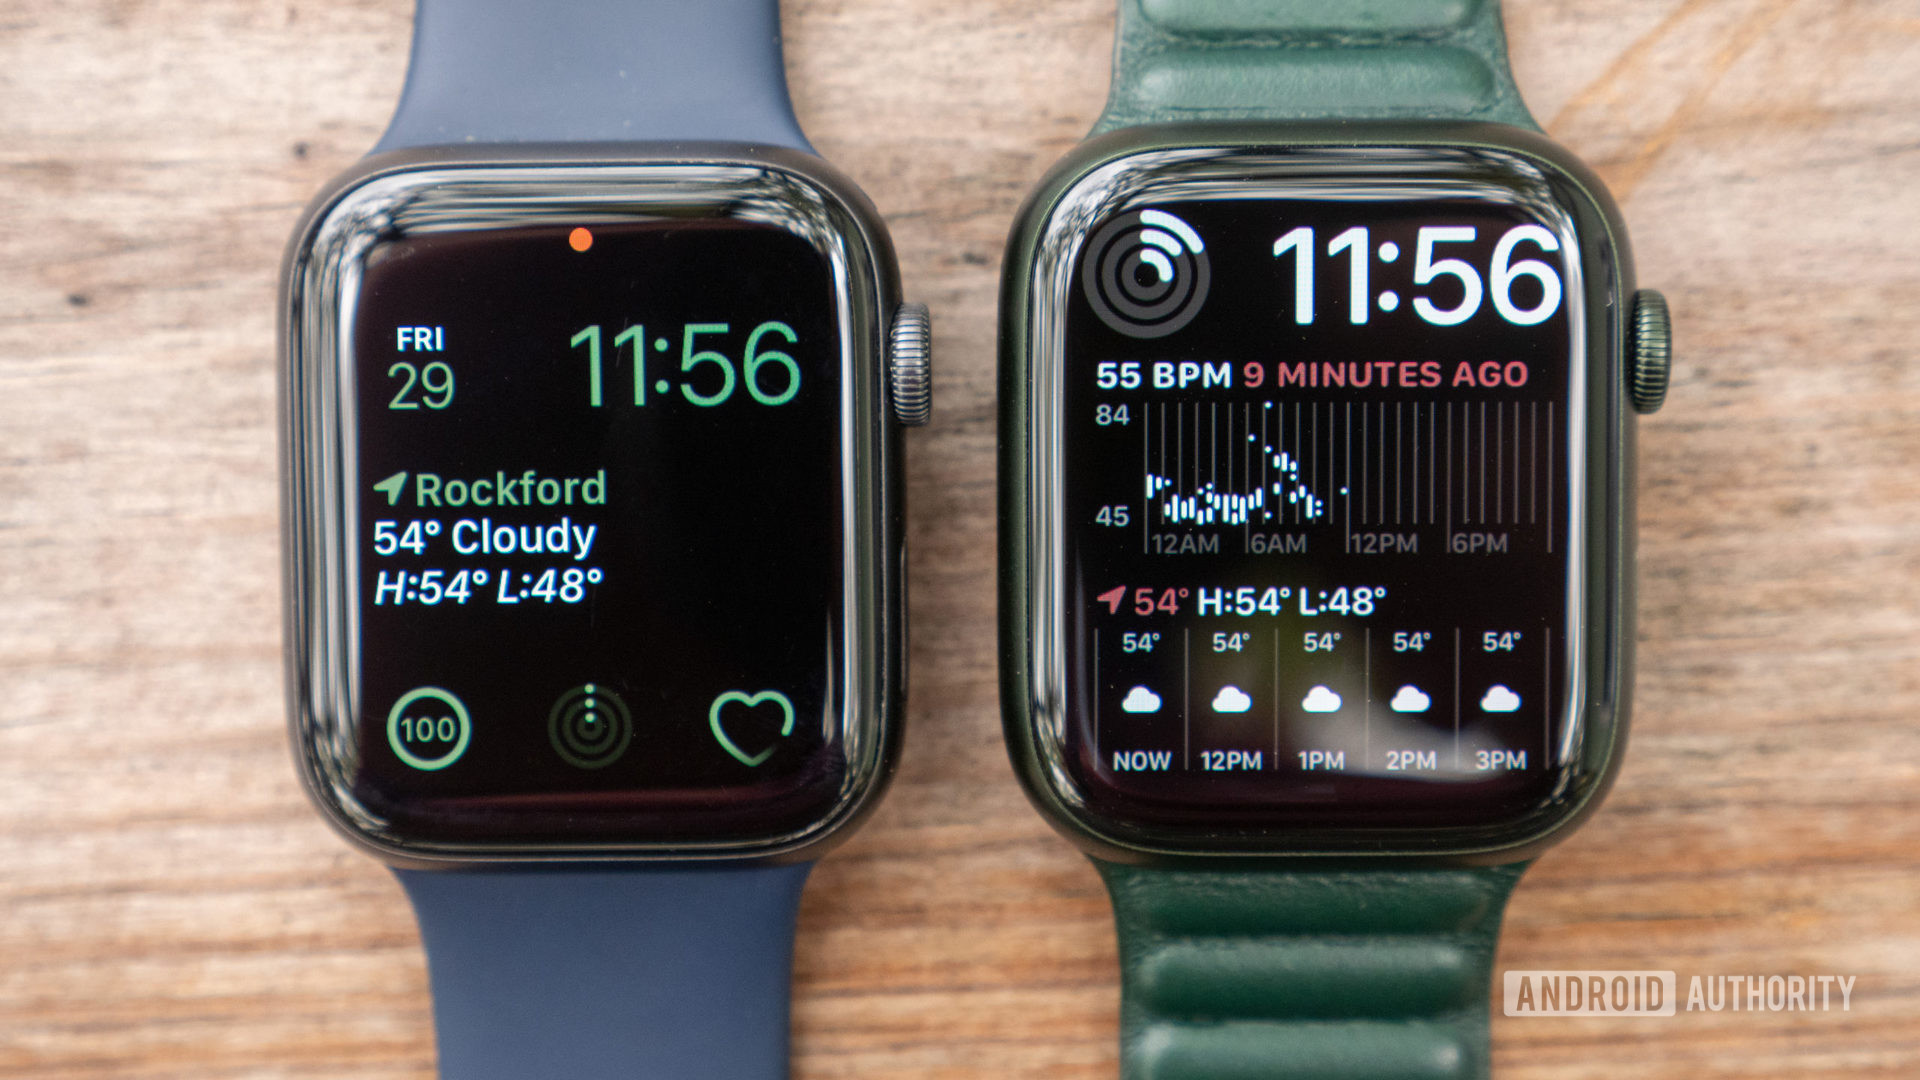 An image of the Apple Watch Series 7 next to the Apple Watch Series 6 showing the display sizes